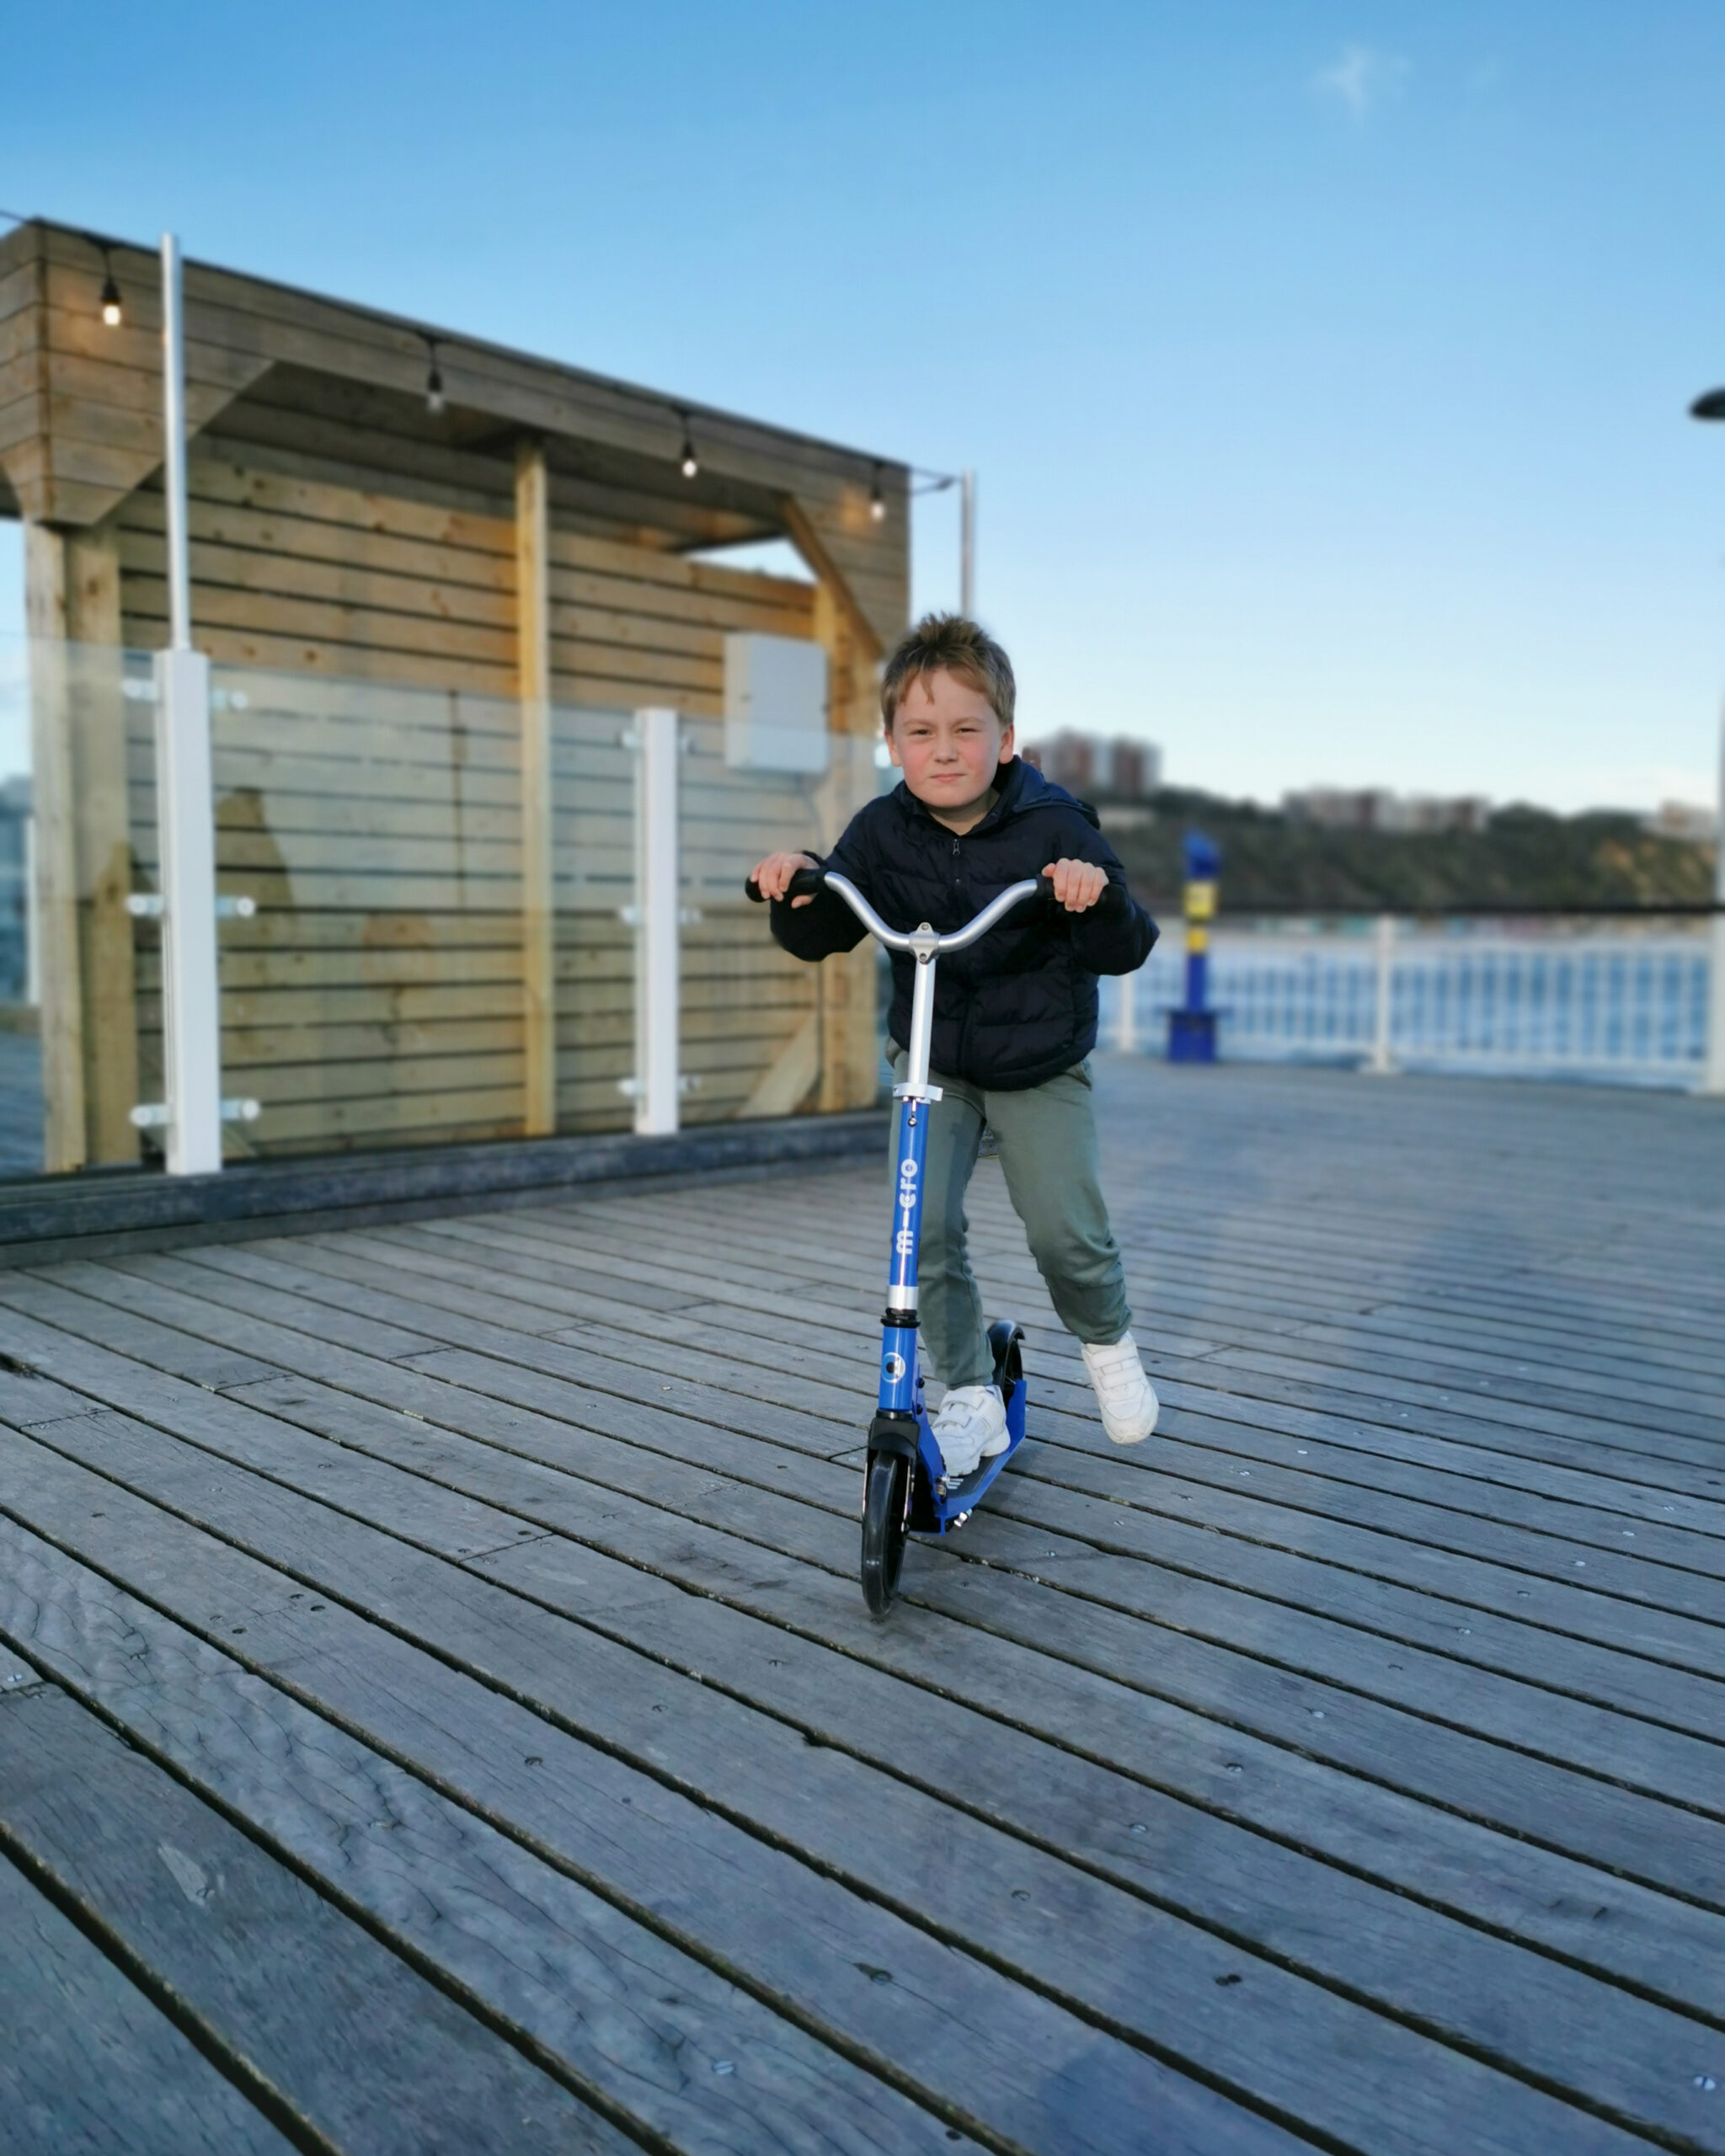 Cruiser LED Micro Scooter, Micro Scooters, Made for Adventure, Made in Switzerland, Scooters, Scooting, the Frenchie Mummy, Frenchie Xmas Giveaways 2023, Giveaway, Competition, Win, 